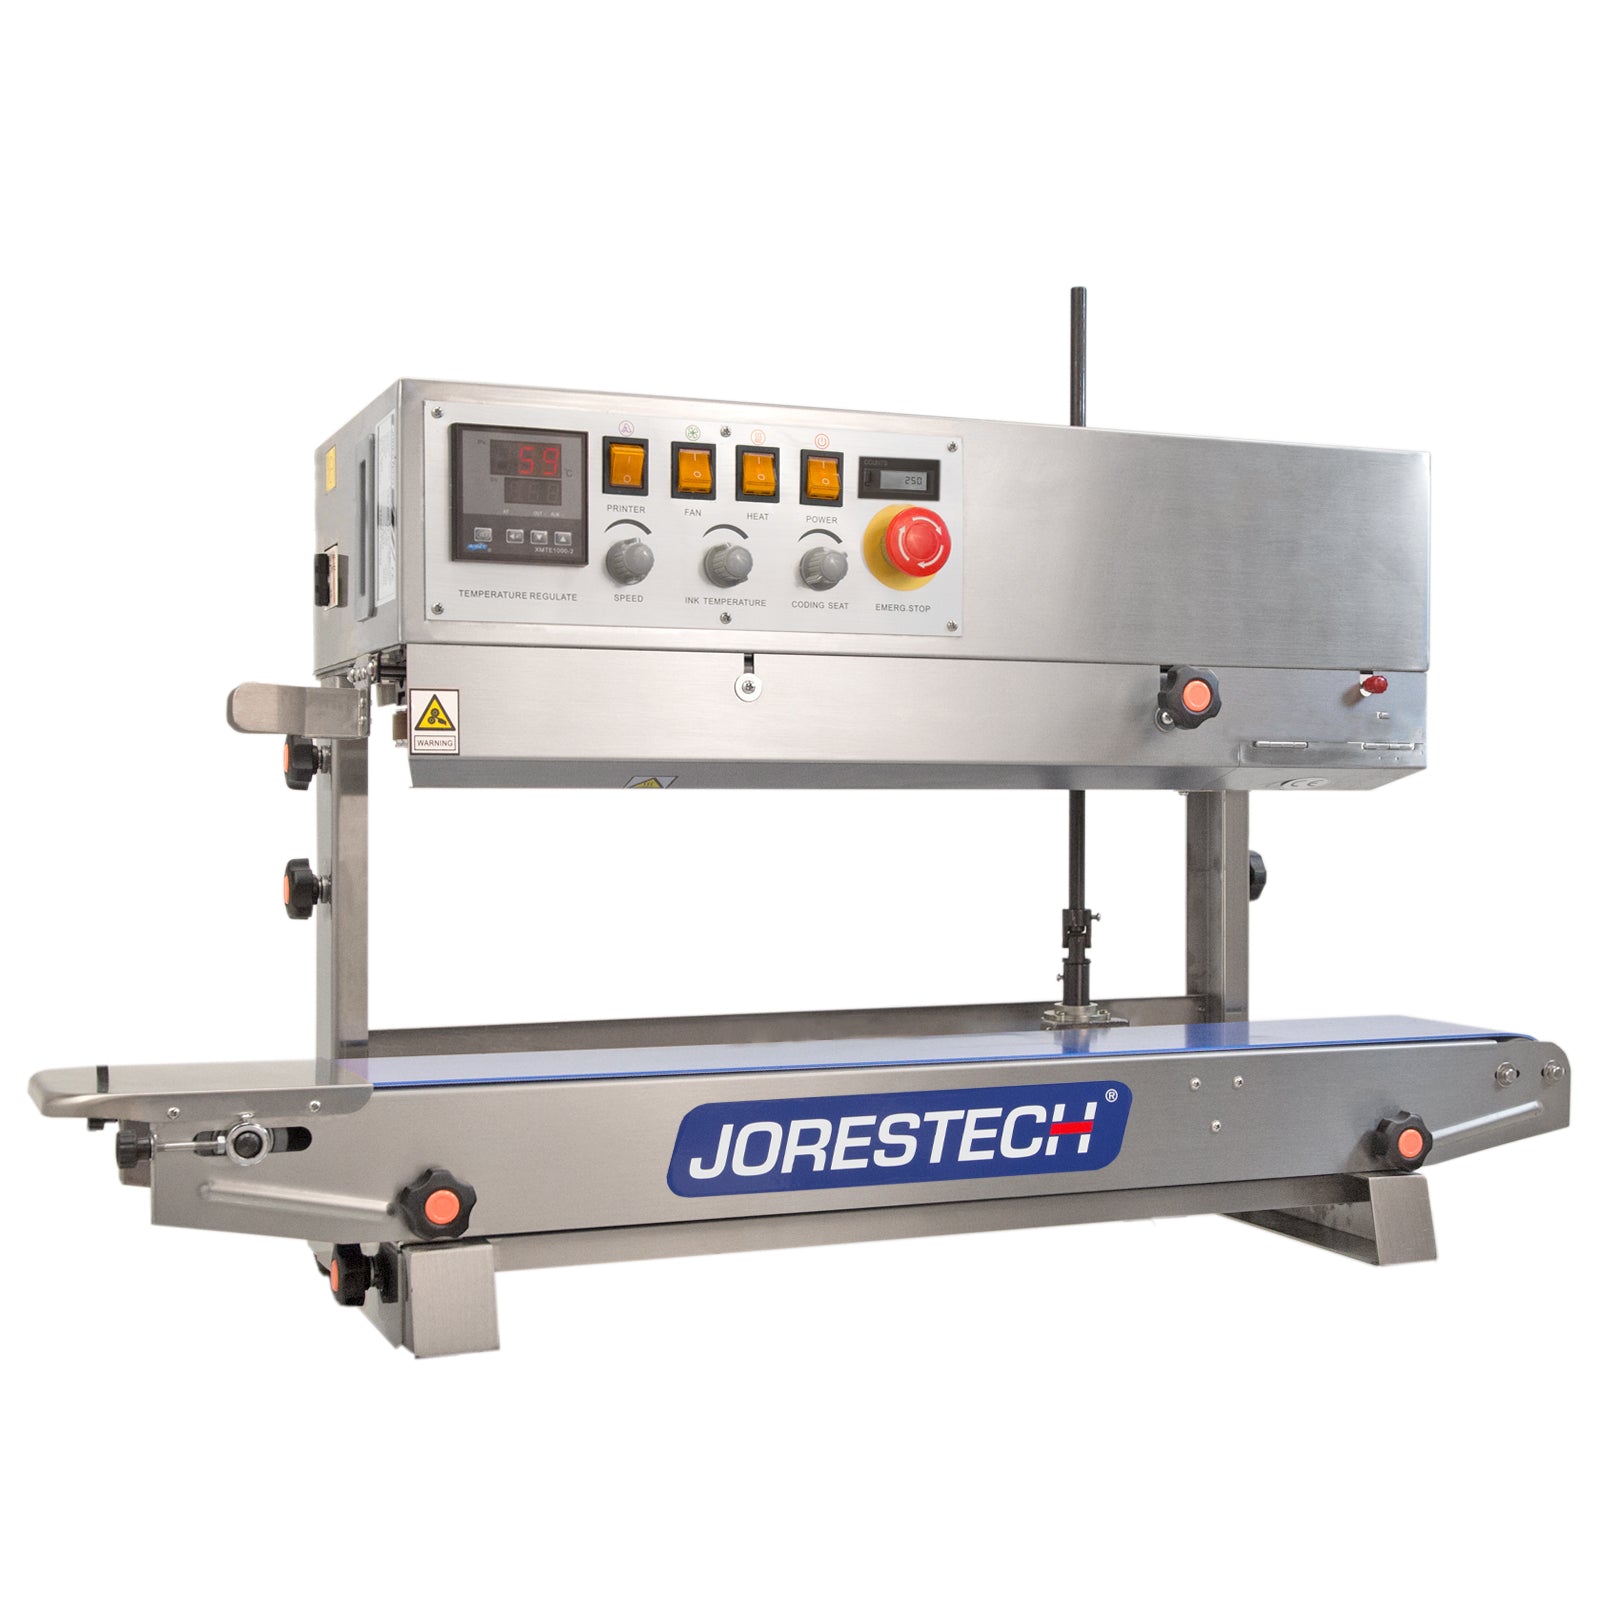 Continuous Band Sealer Horizontal Ink wheel – CECLE Machine